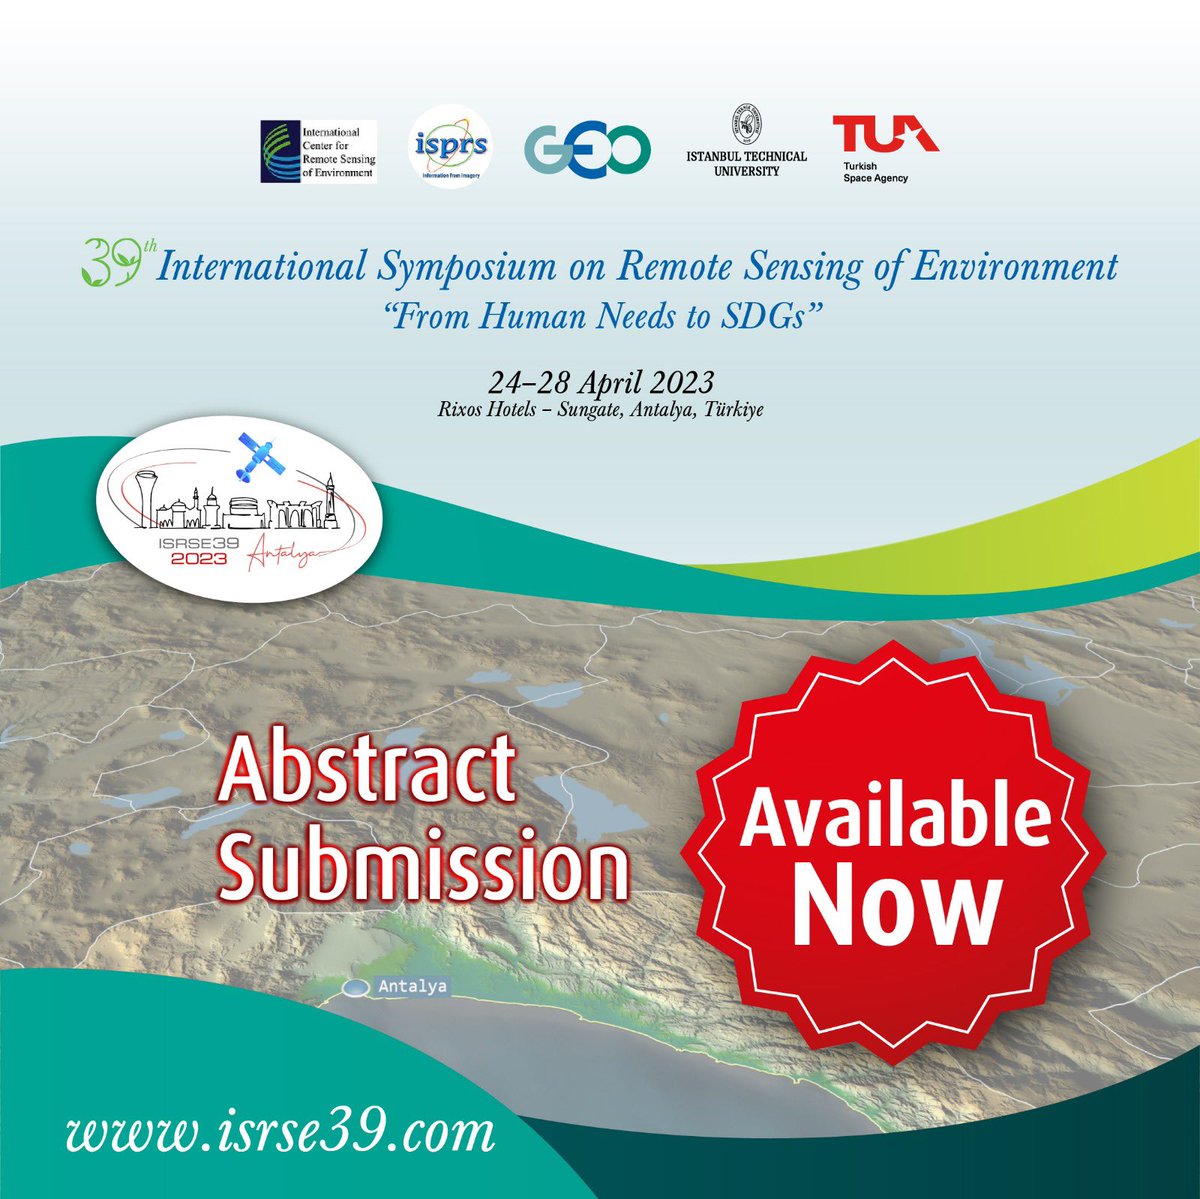 Abstract submission available now isrse39.com